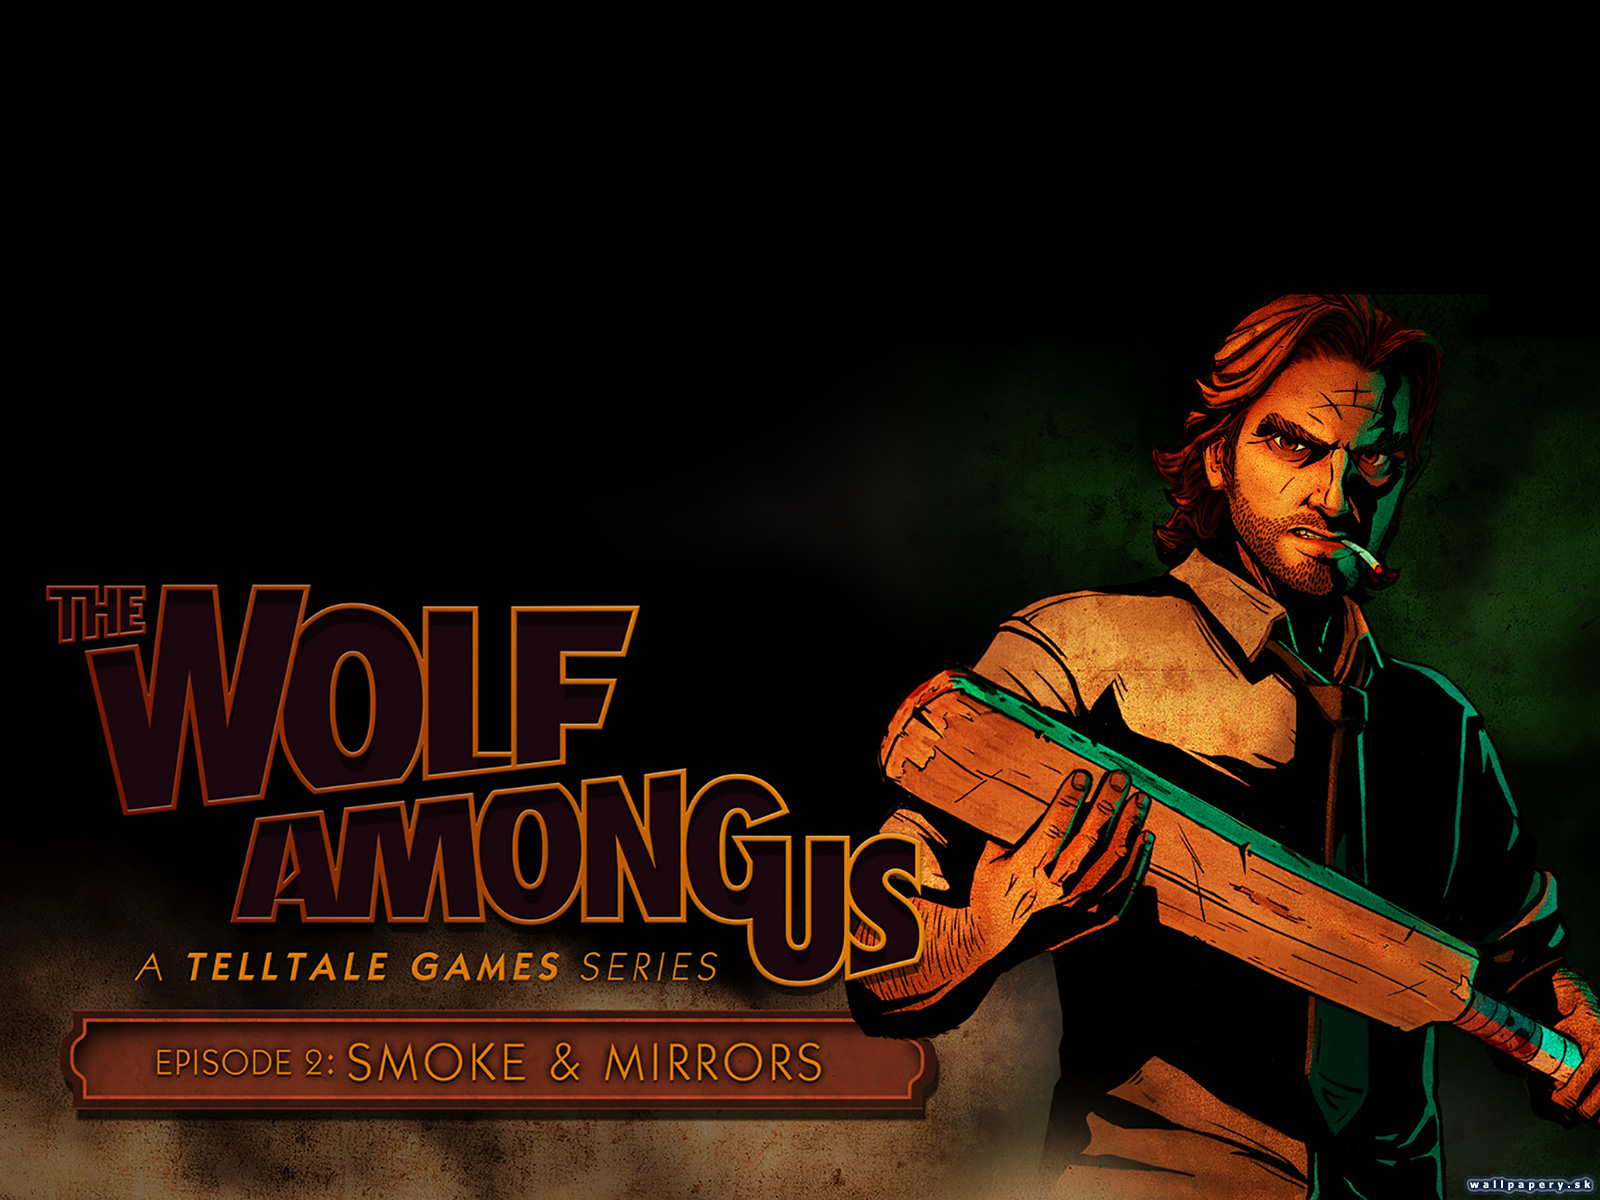 The Wolf Among Us - Episode 2: Smoke and Mirrors - wallpaper 1